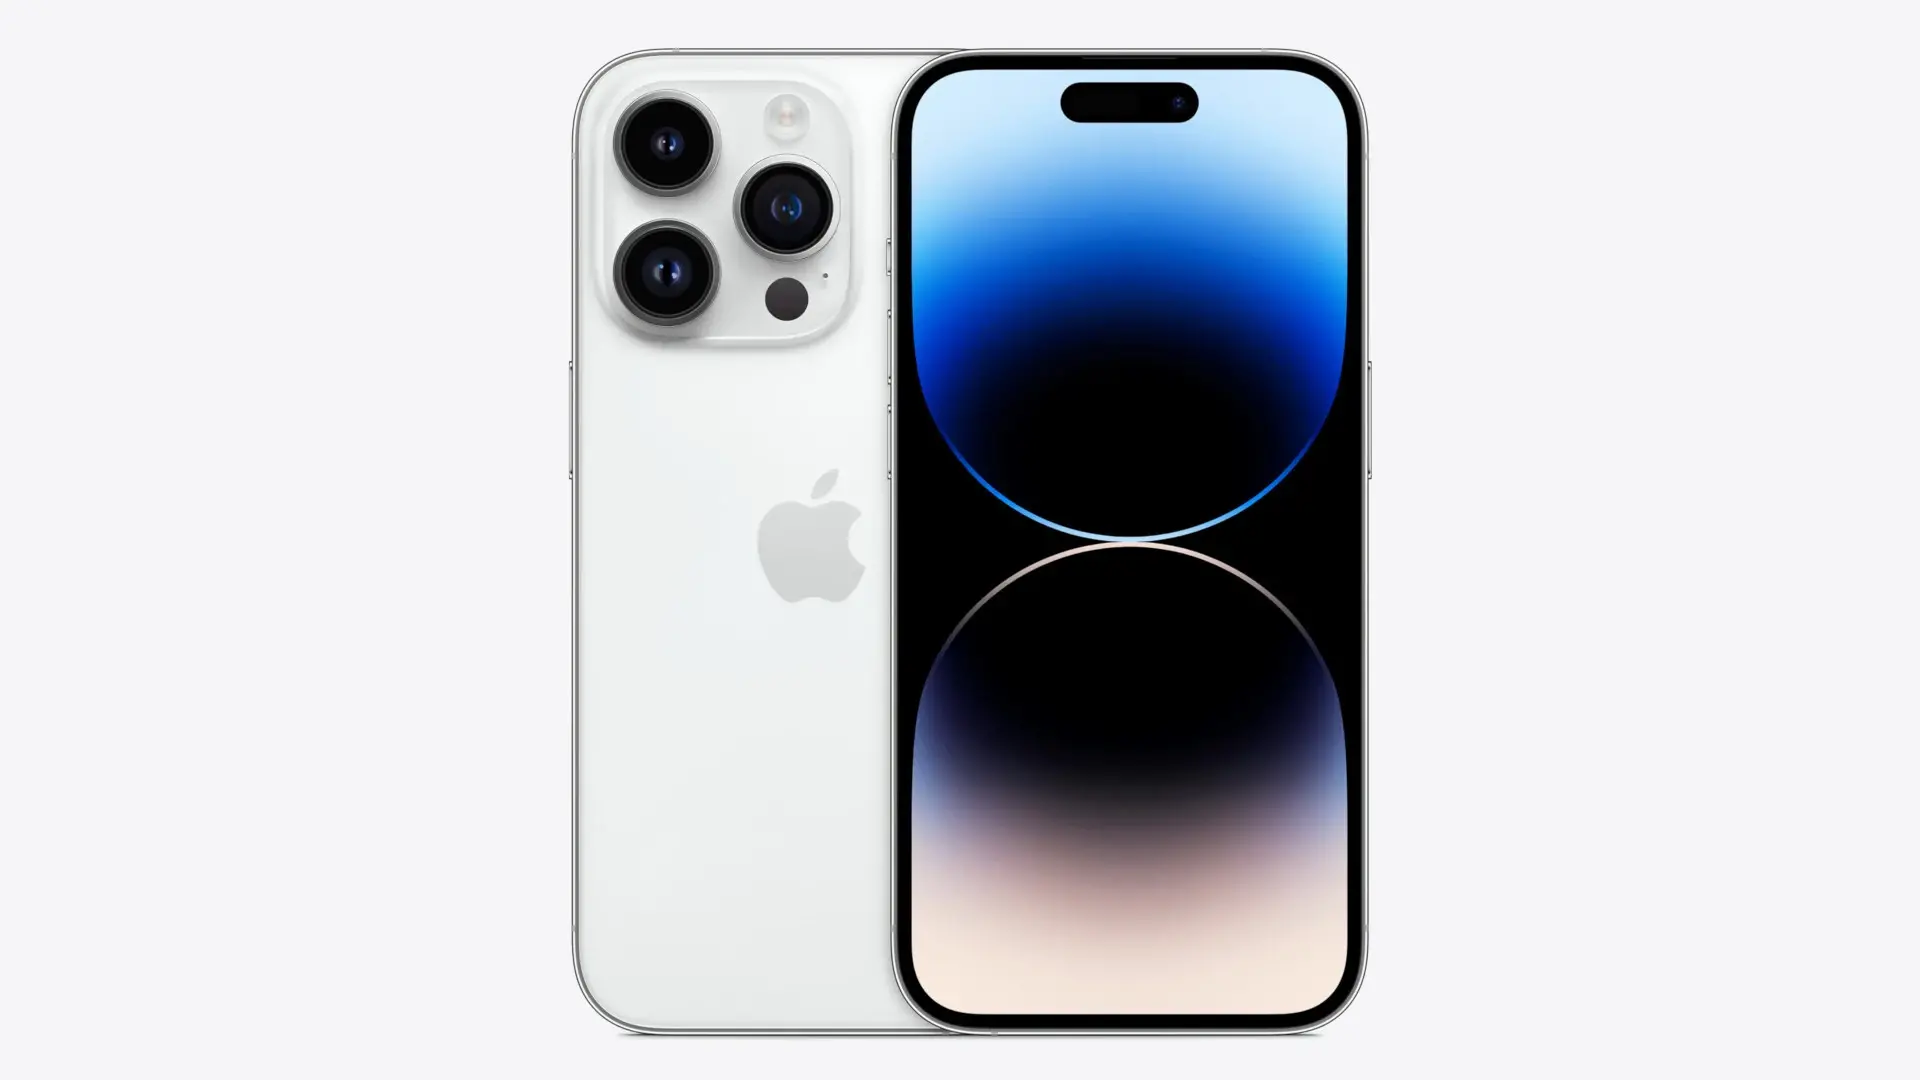 The iPhone 14 Pro showcasing the Silver option - iPhone 15 colors: what to expect